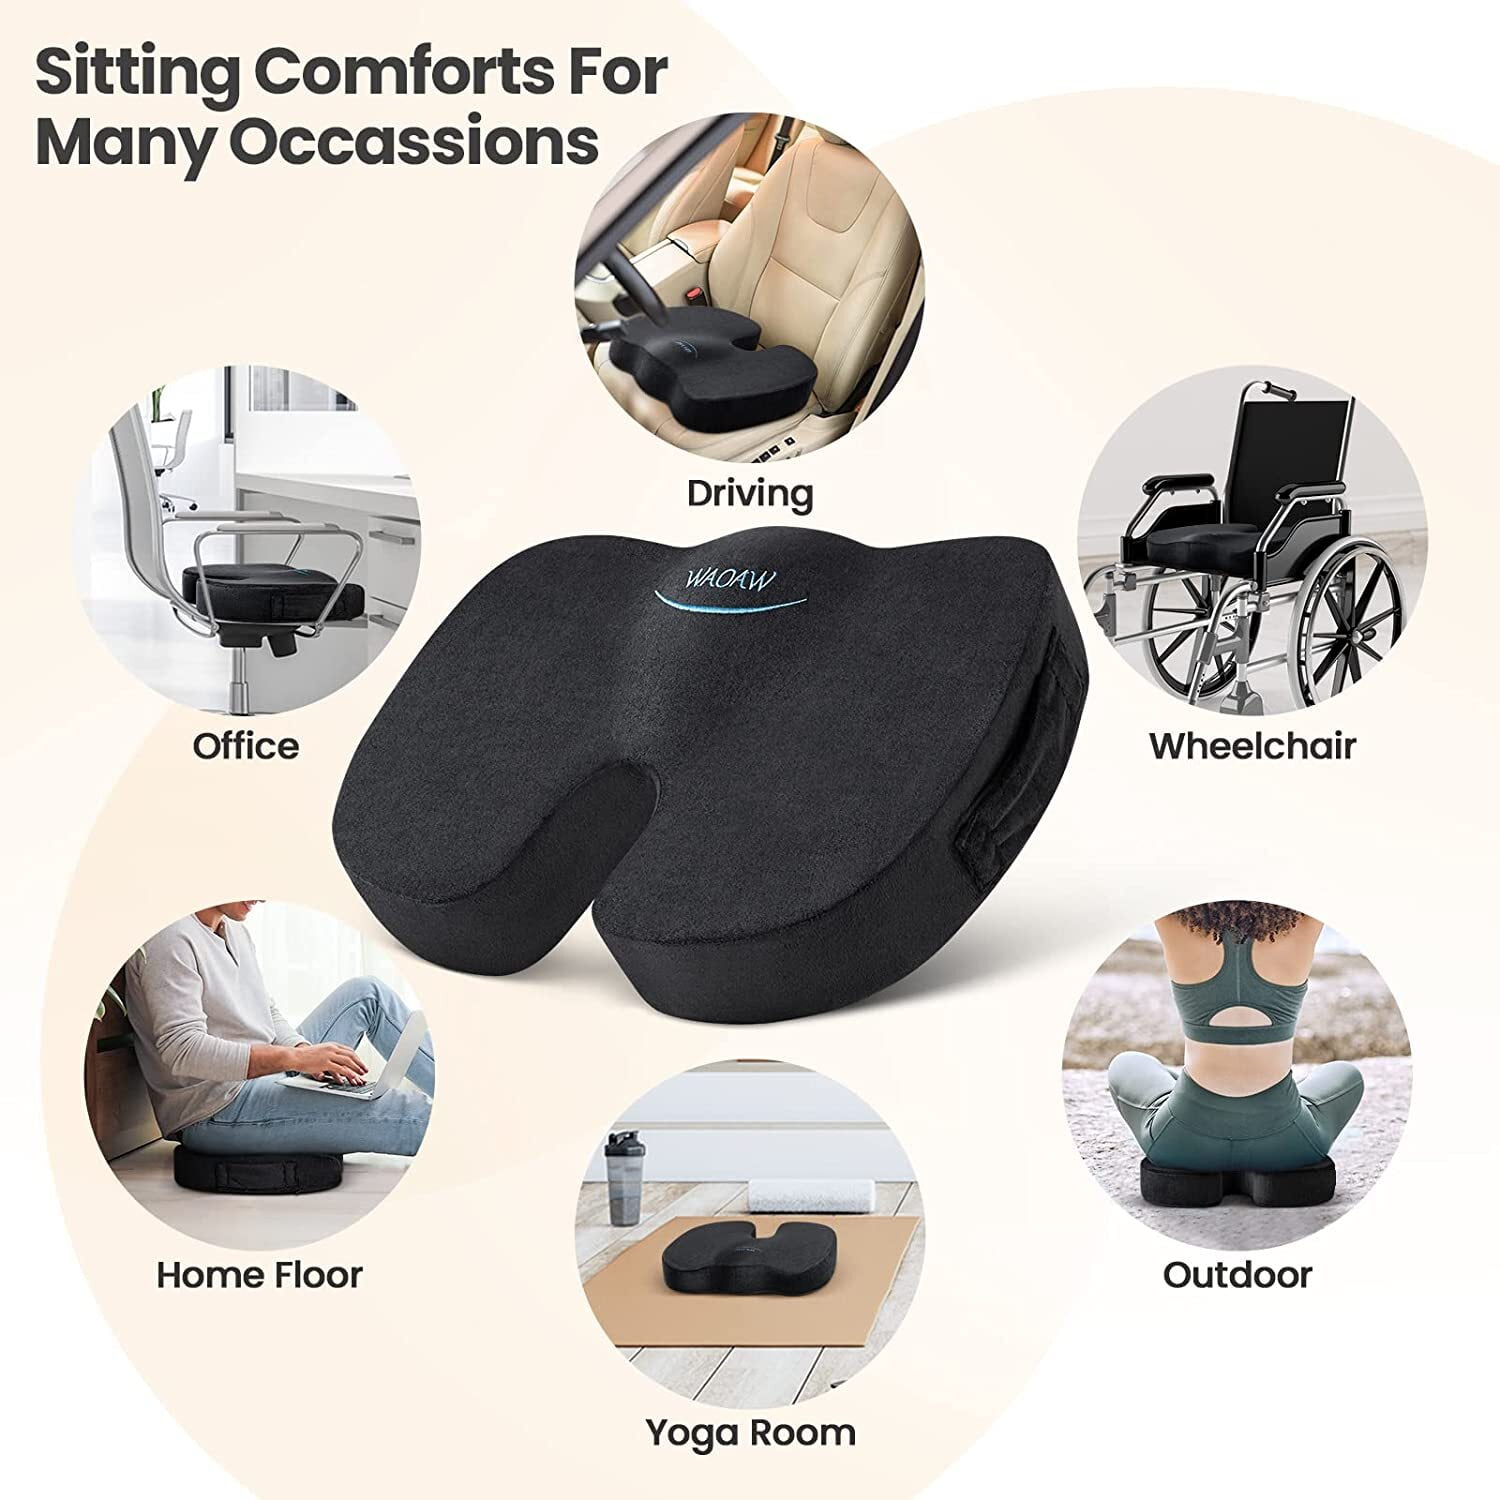 iBhejo.com - ComfiLife Gel Enhanced Seat Cushion for Back Pain, Sciatica,  Pregnancy, Herniated Disc, Spinal issues, LumbarSupport, Back Pain Relief &  more Shop Now:  #ComfiLife #SeatCushion  #GelSeatCushion #BackPainRelief